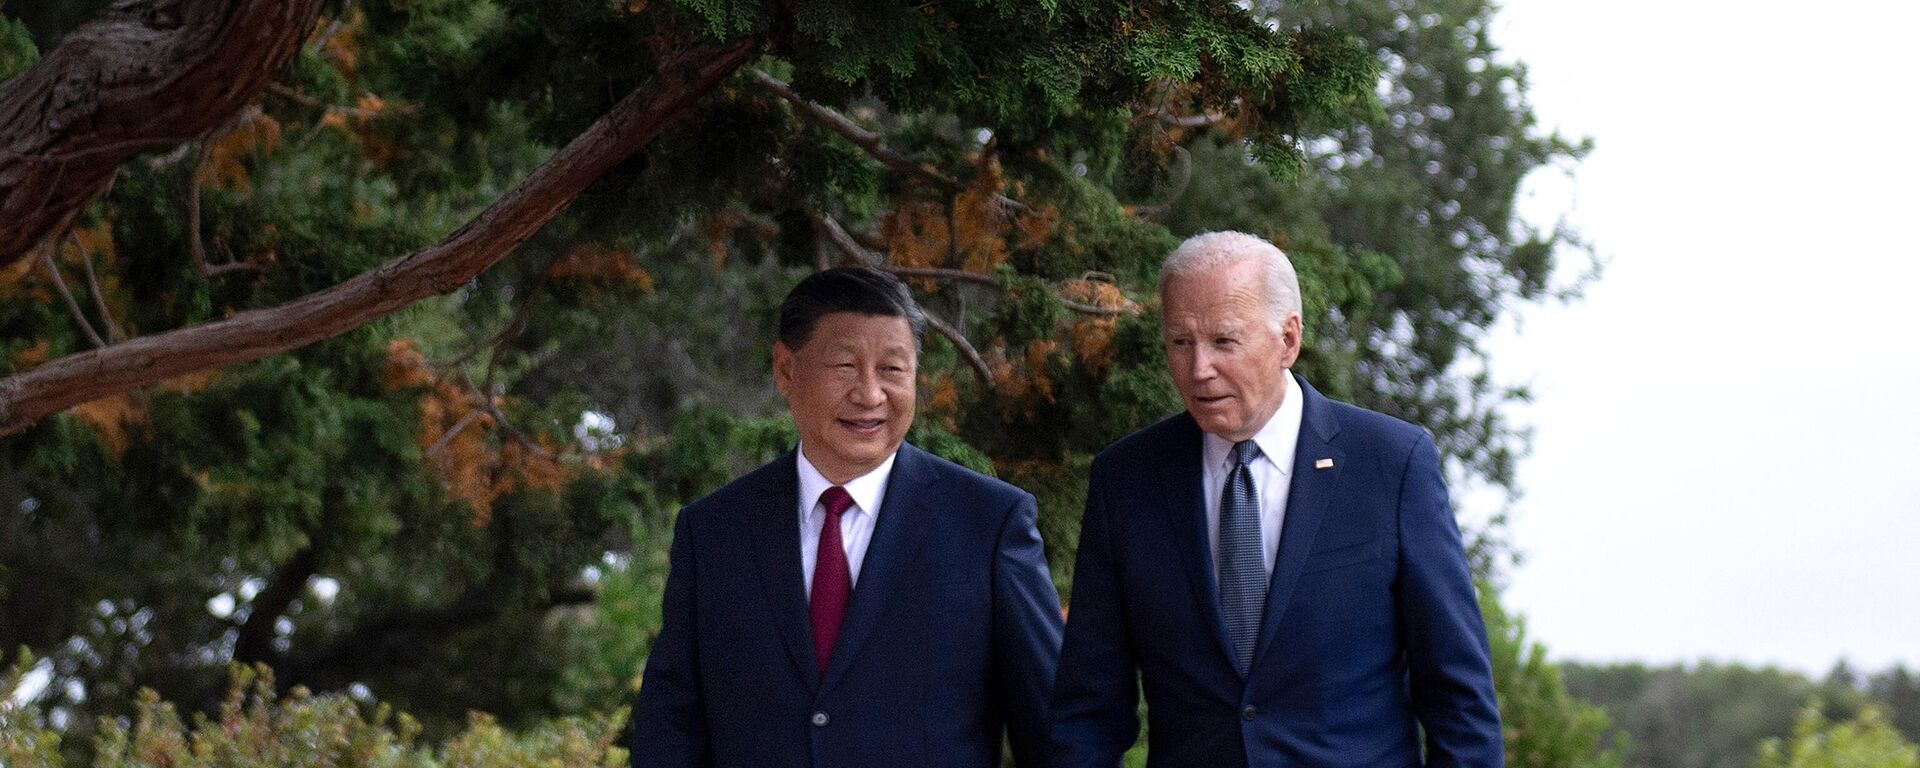 US President Joe Biden (R) and Chinese President Xi Jinping walk together after a meeting during the Asia-Pacific Economic Cooperation (APEC) Leaders' week in Woodside, California on November 15, 2023 - Sputnik International, 1920, 21.12.2023